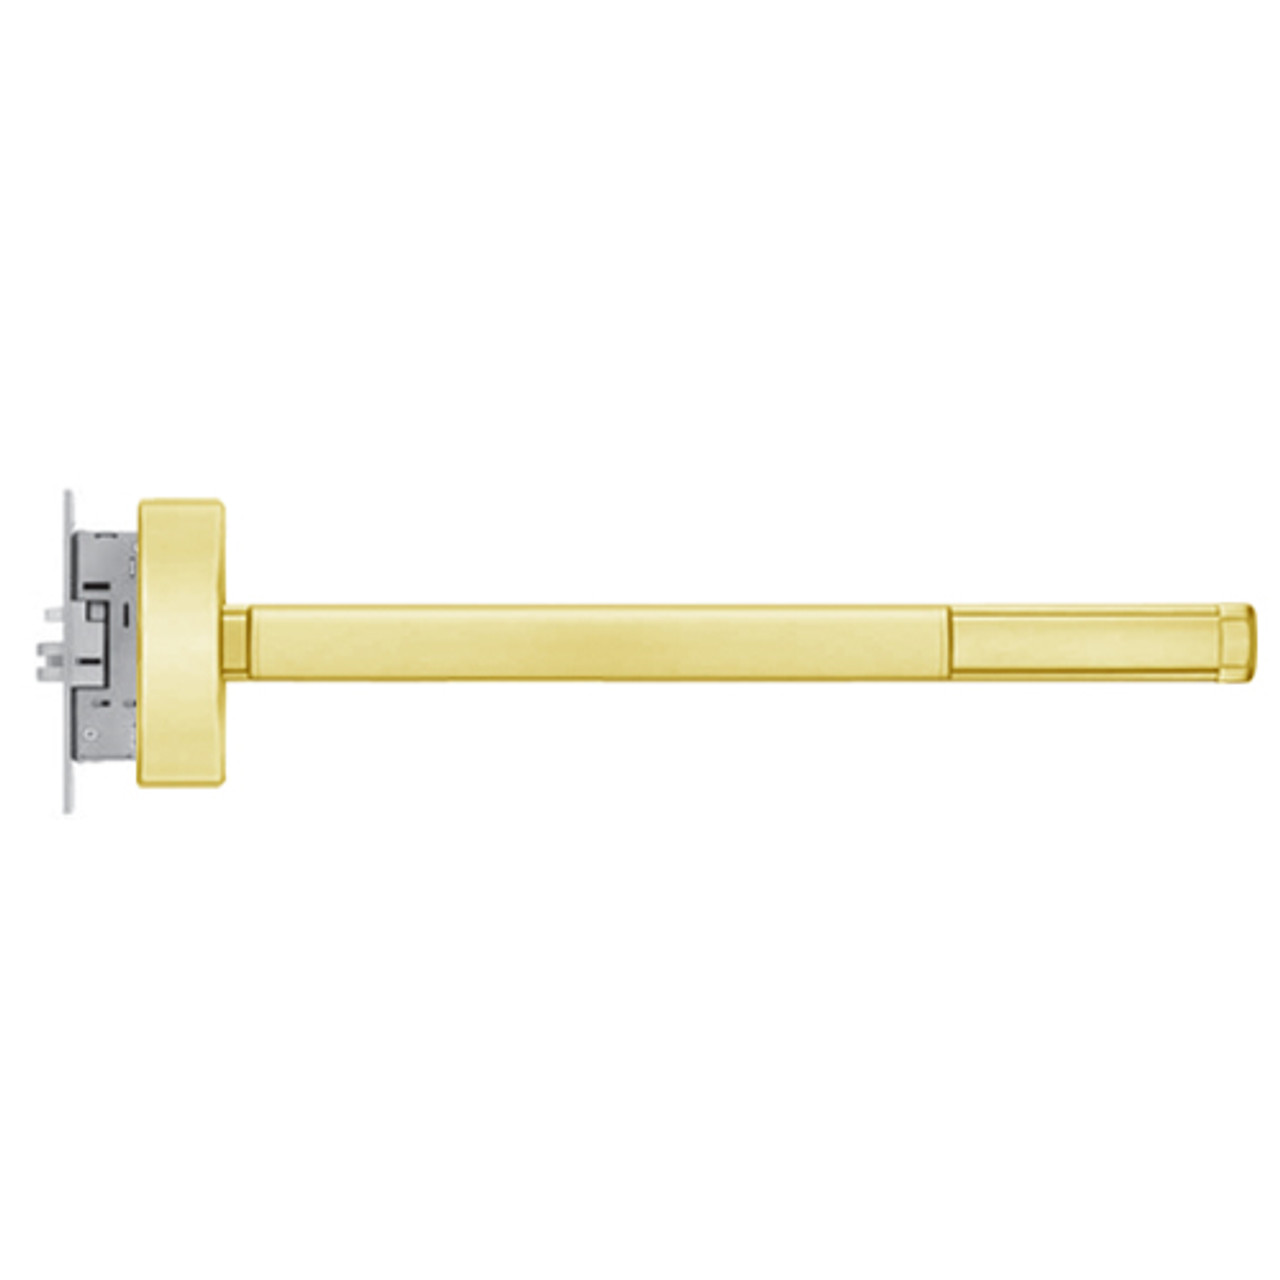 DEFL2308-RHR-605-48 PHI 2300 Series Fire Rated Apex Mortise Exit Device with Delayed Egress Prepped for Key Controls Lever/Knob in Bright Brass Finish